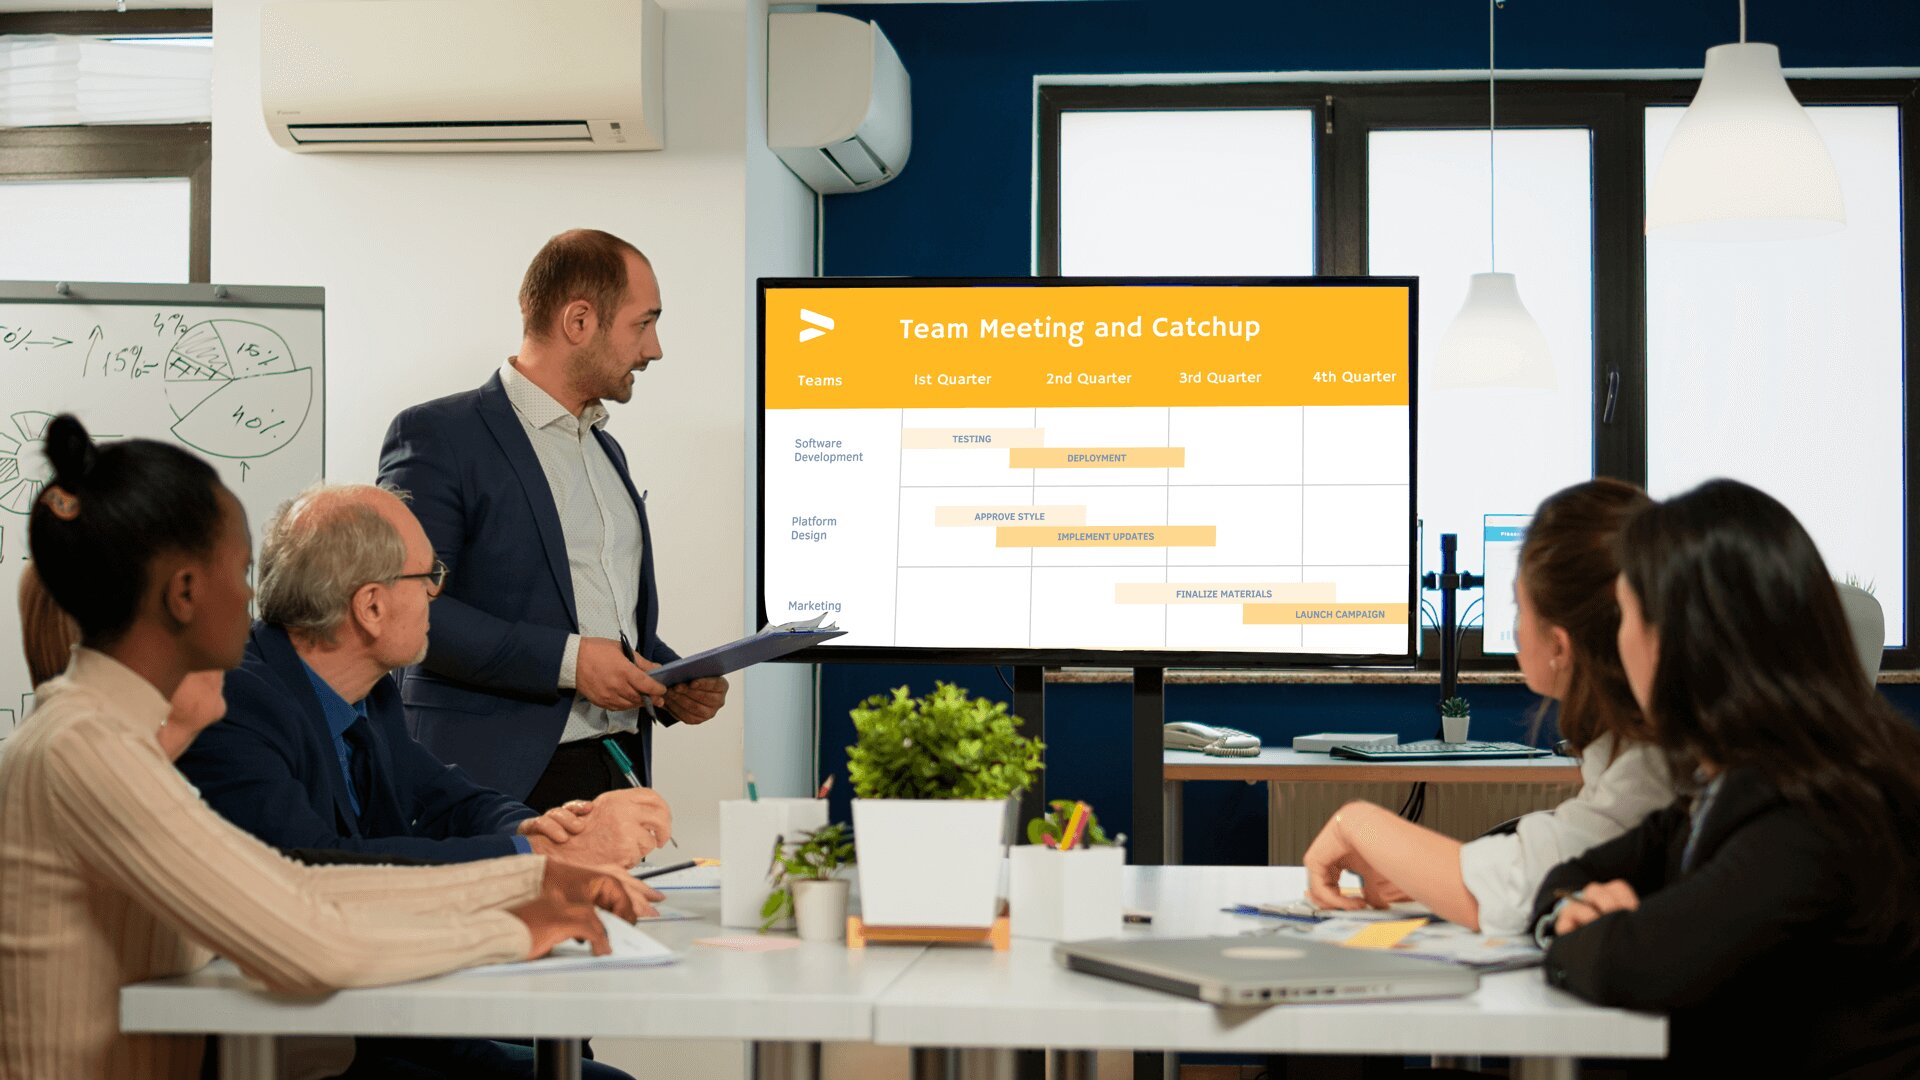 A team of employees discusses their schedule inside an office. They refer to a digital screen showing their work timelines